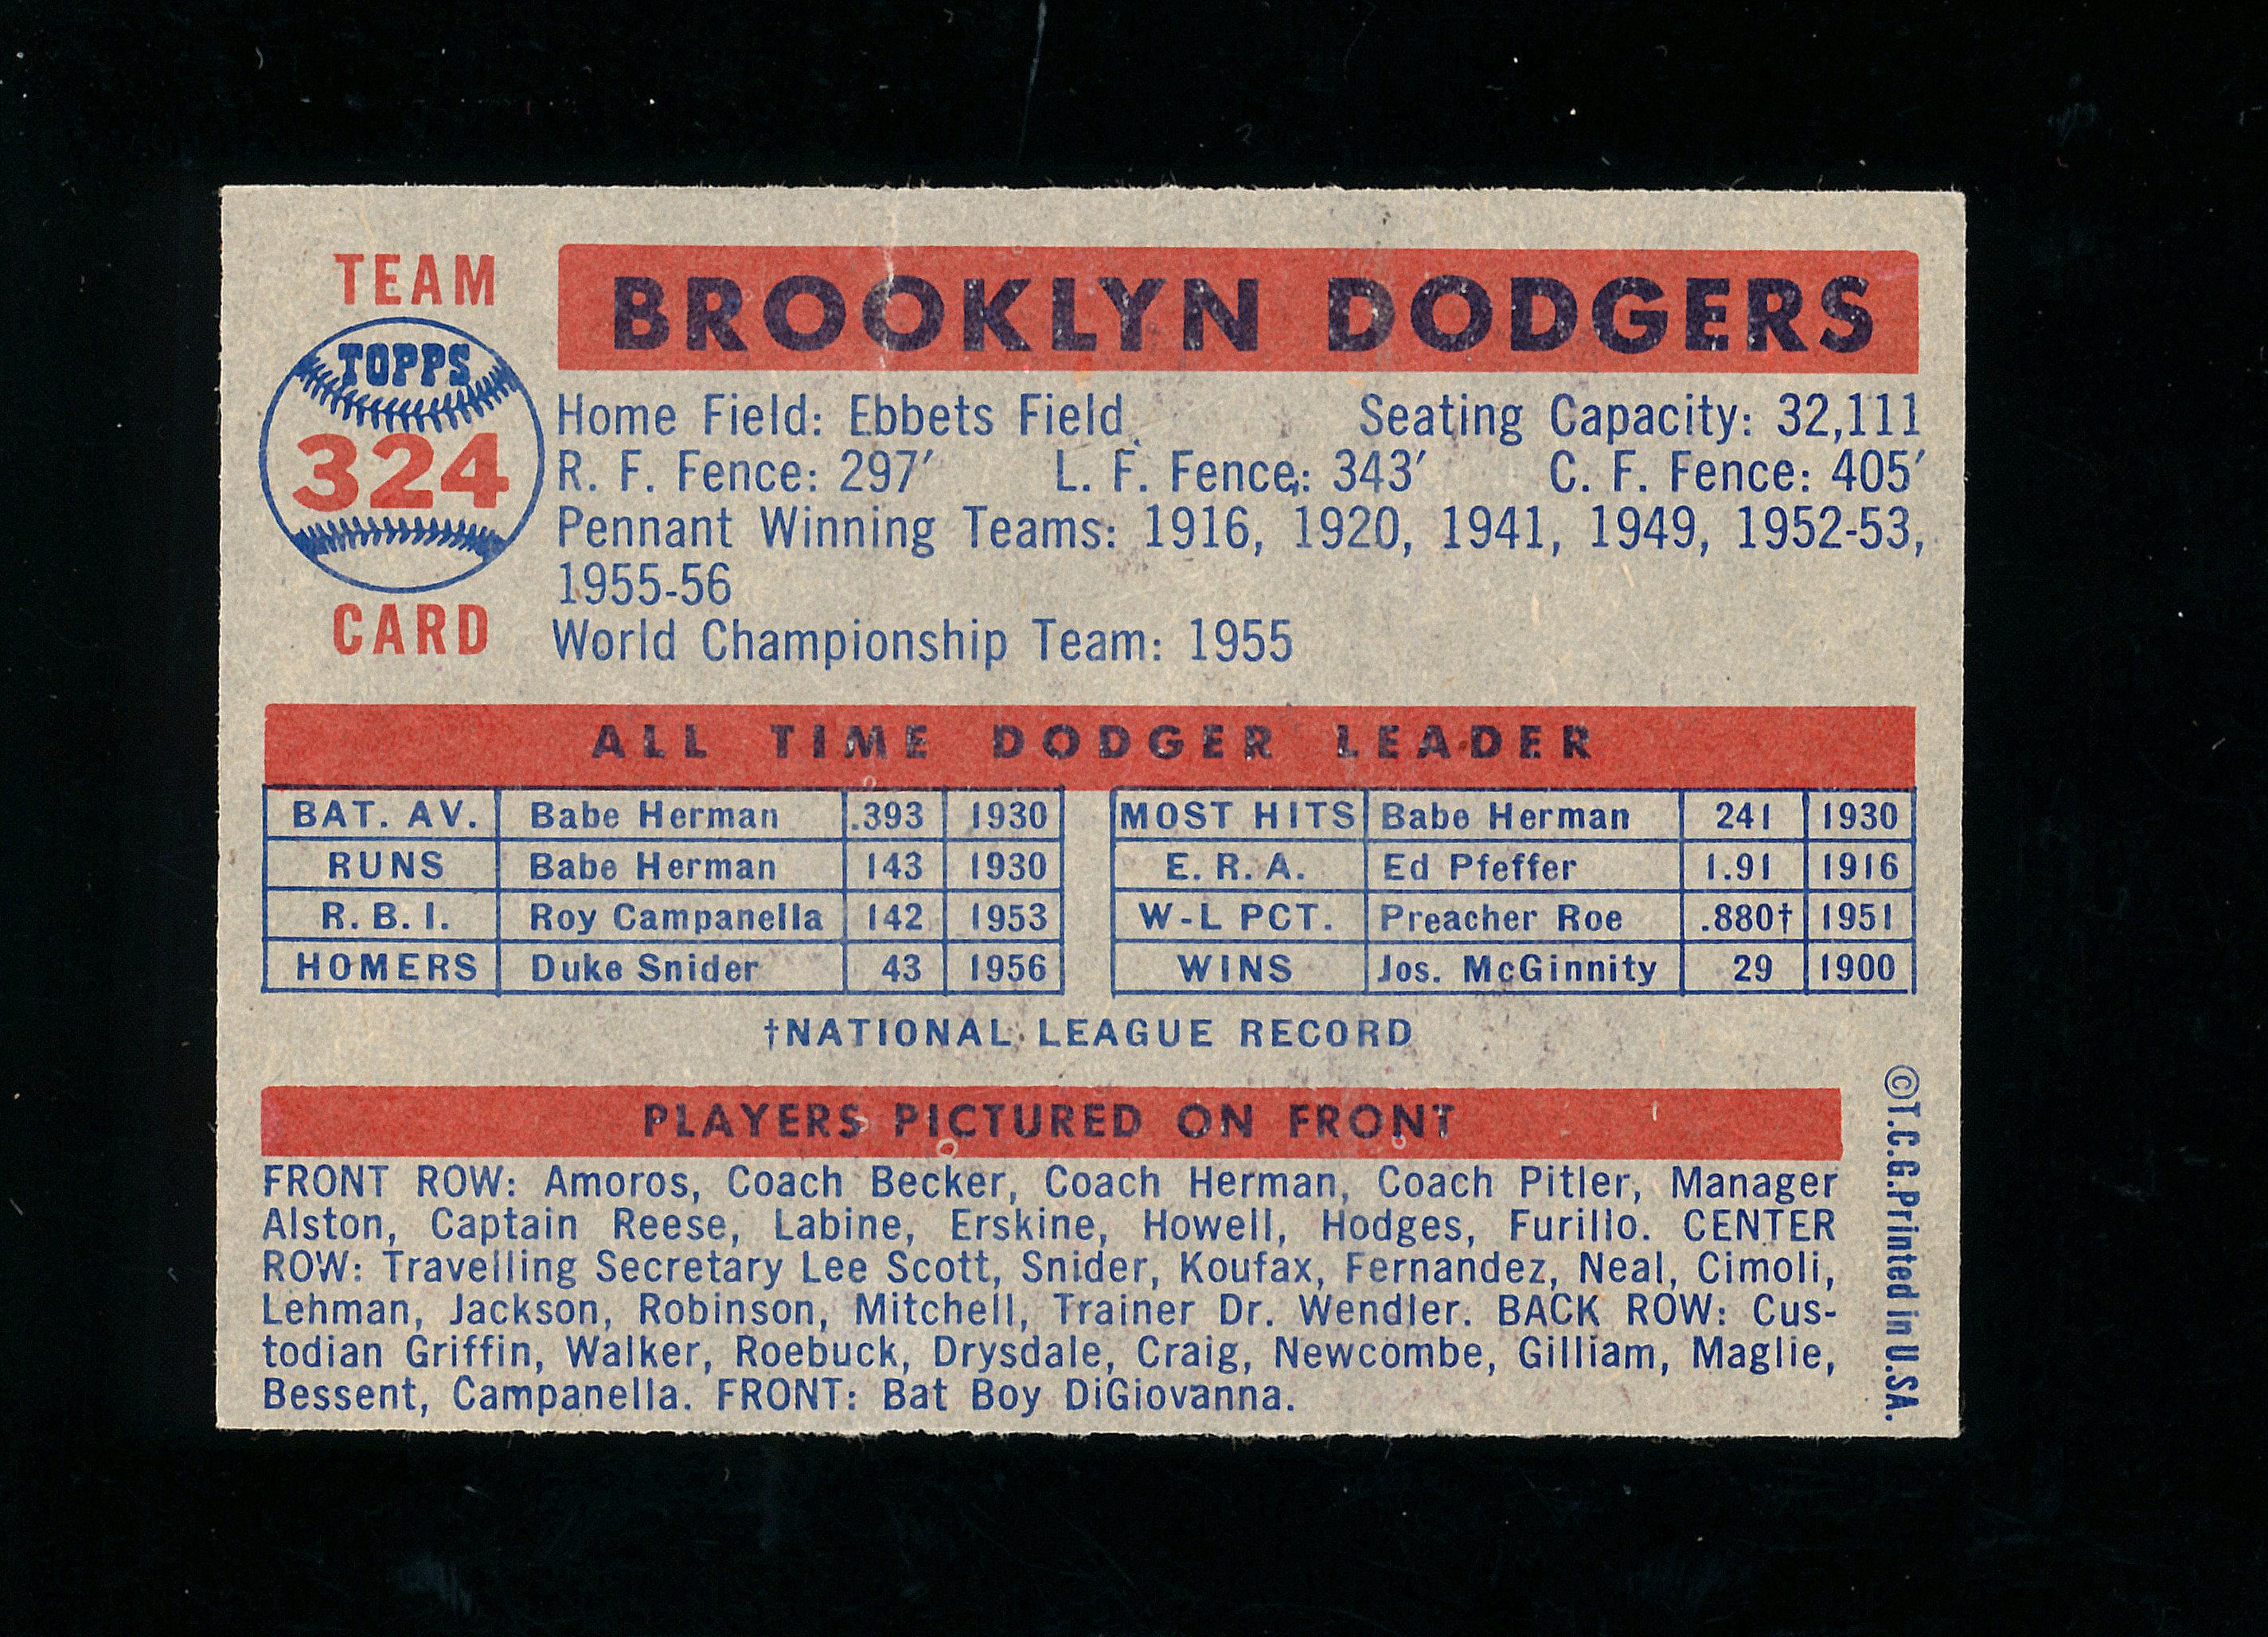 1957 Topps Baseball Card #324 Brooklyn Dodgers Team. Has Crease on front To